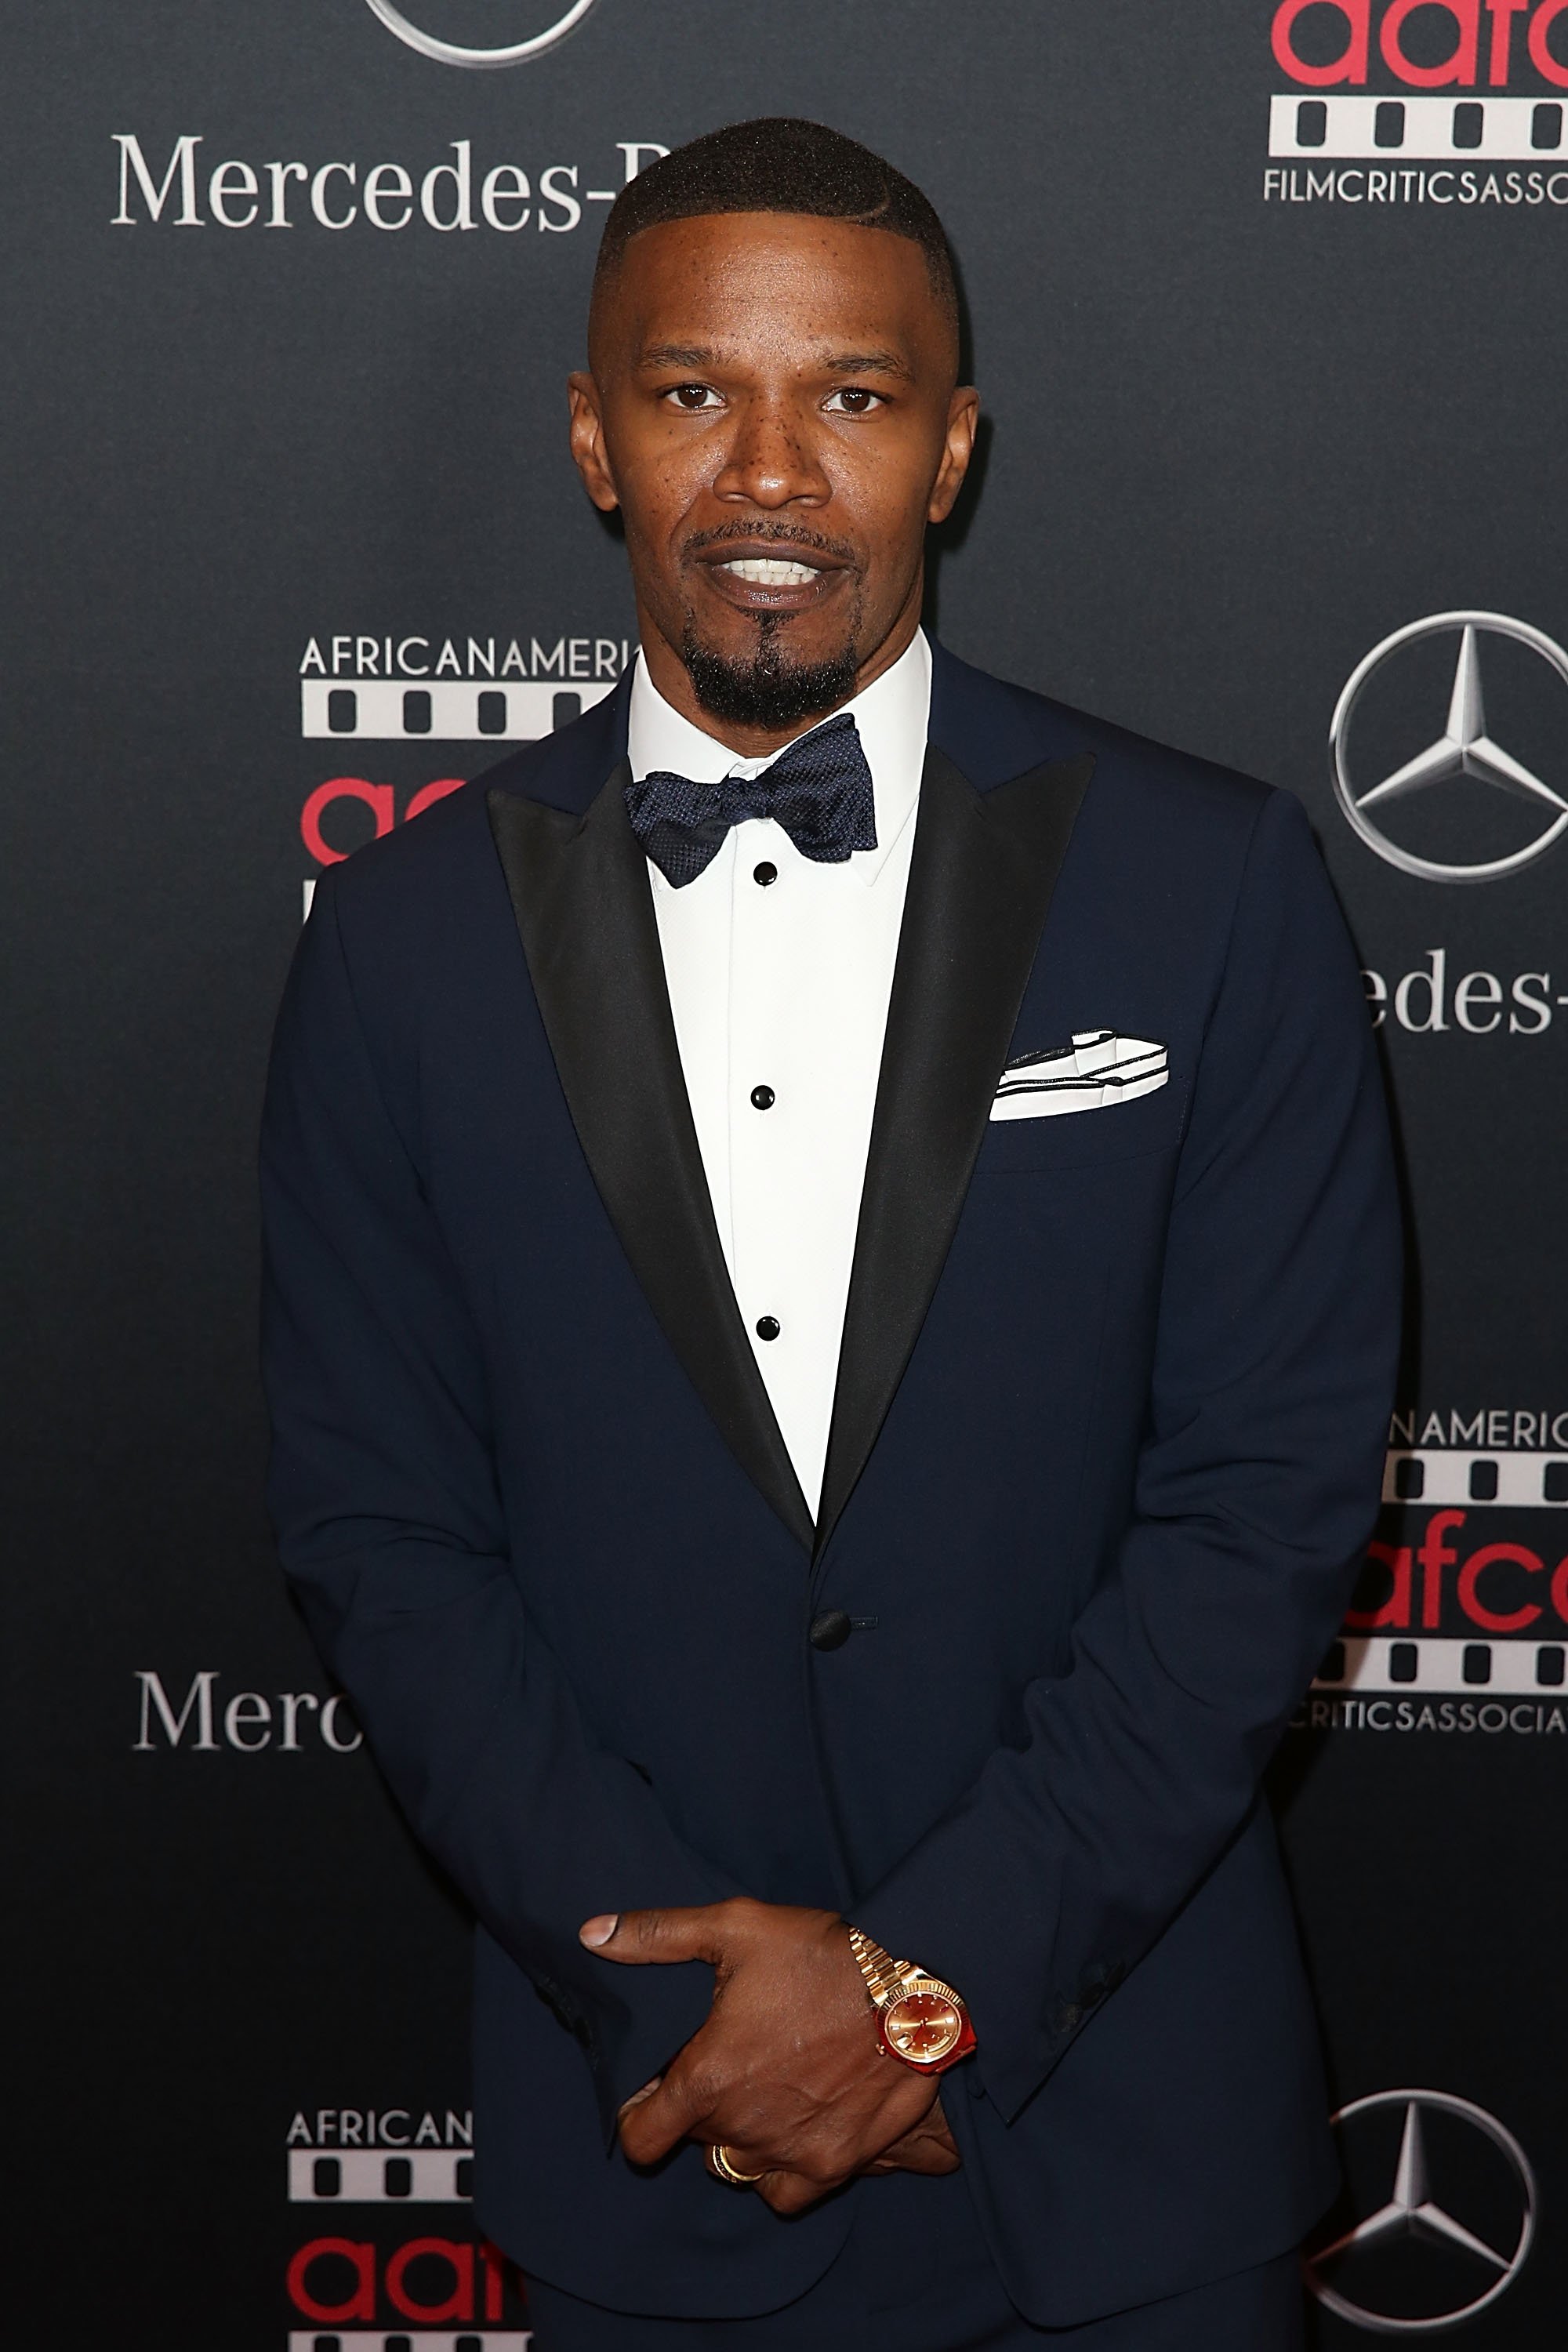 Jamie Foxx at an Oscar viewing party in February 2016. | Photo: Getty Images